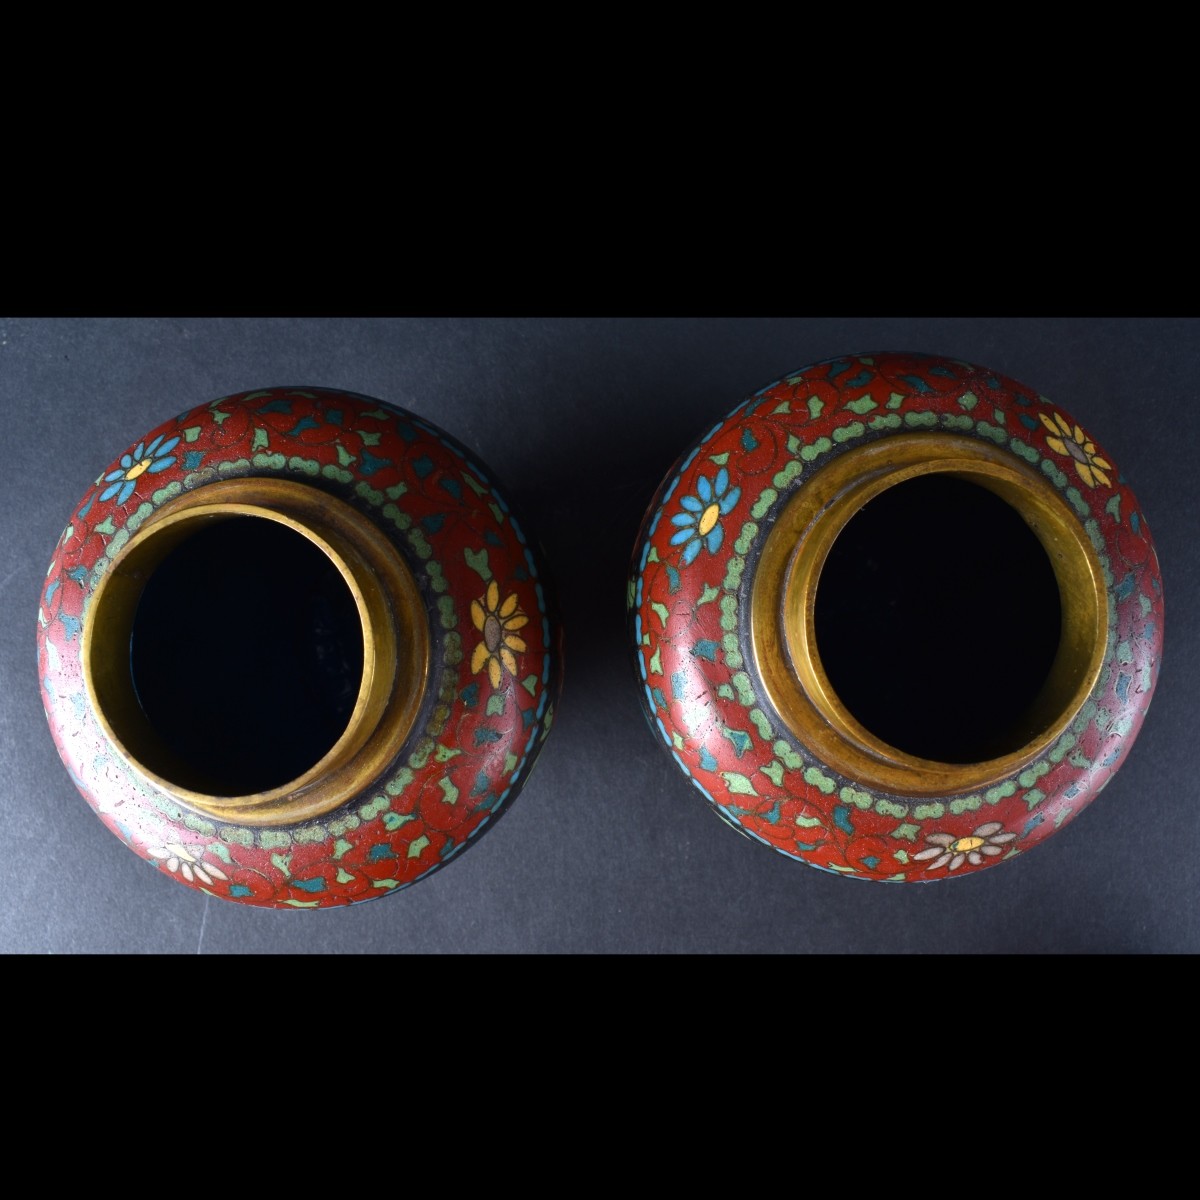 Chinese Cloisonne Vases